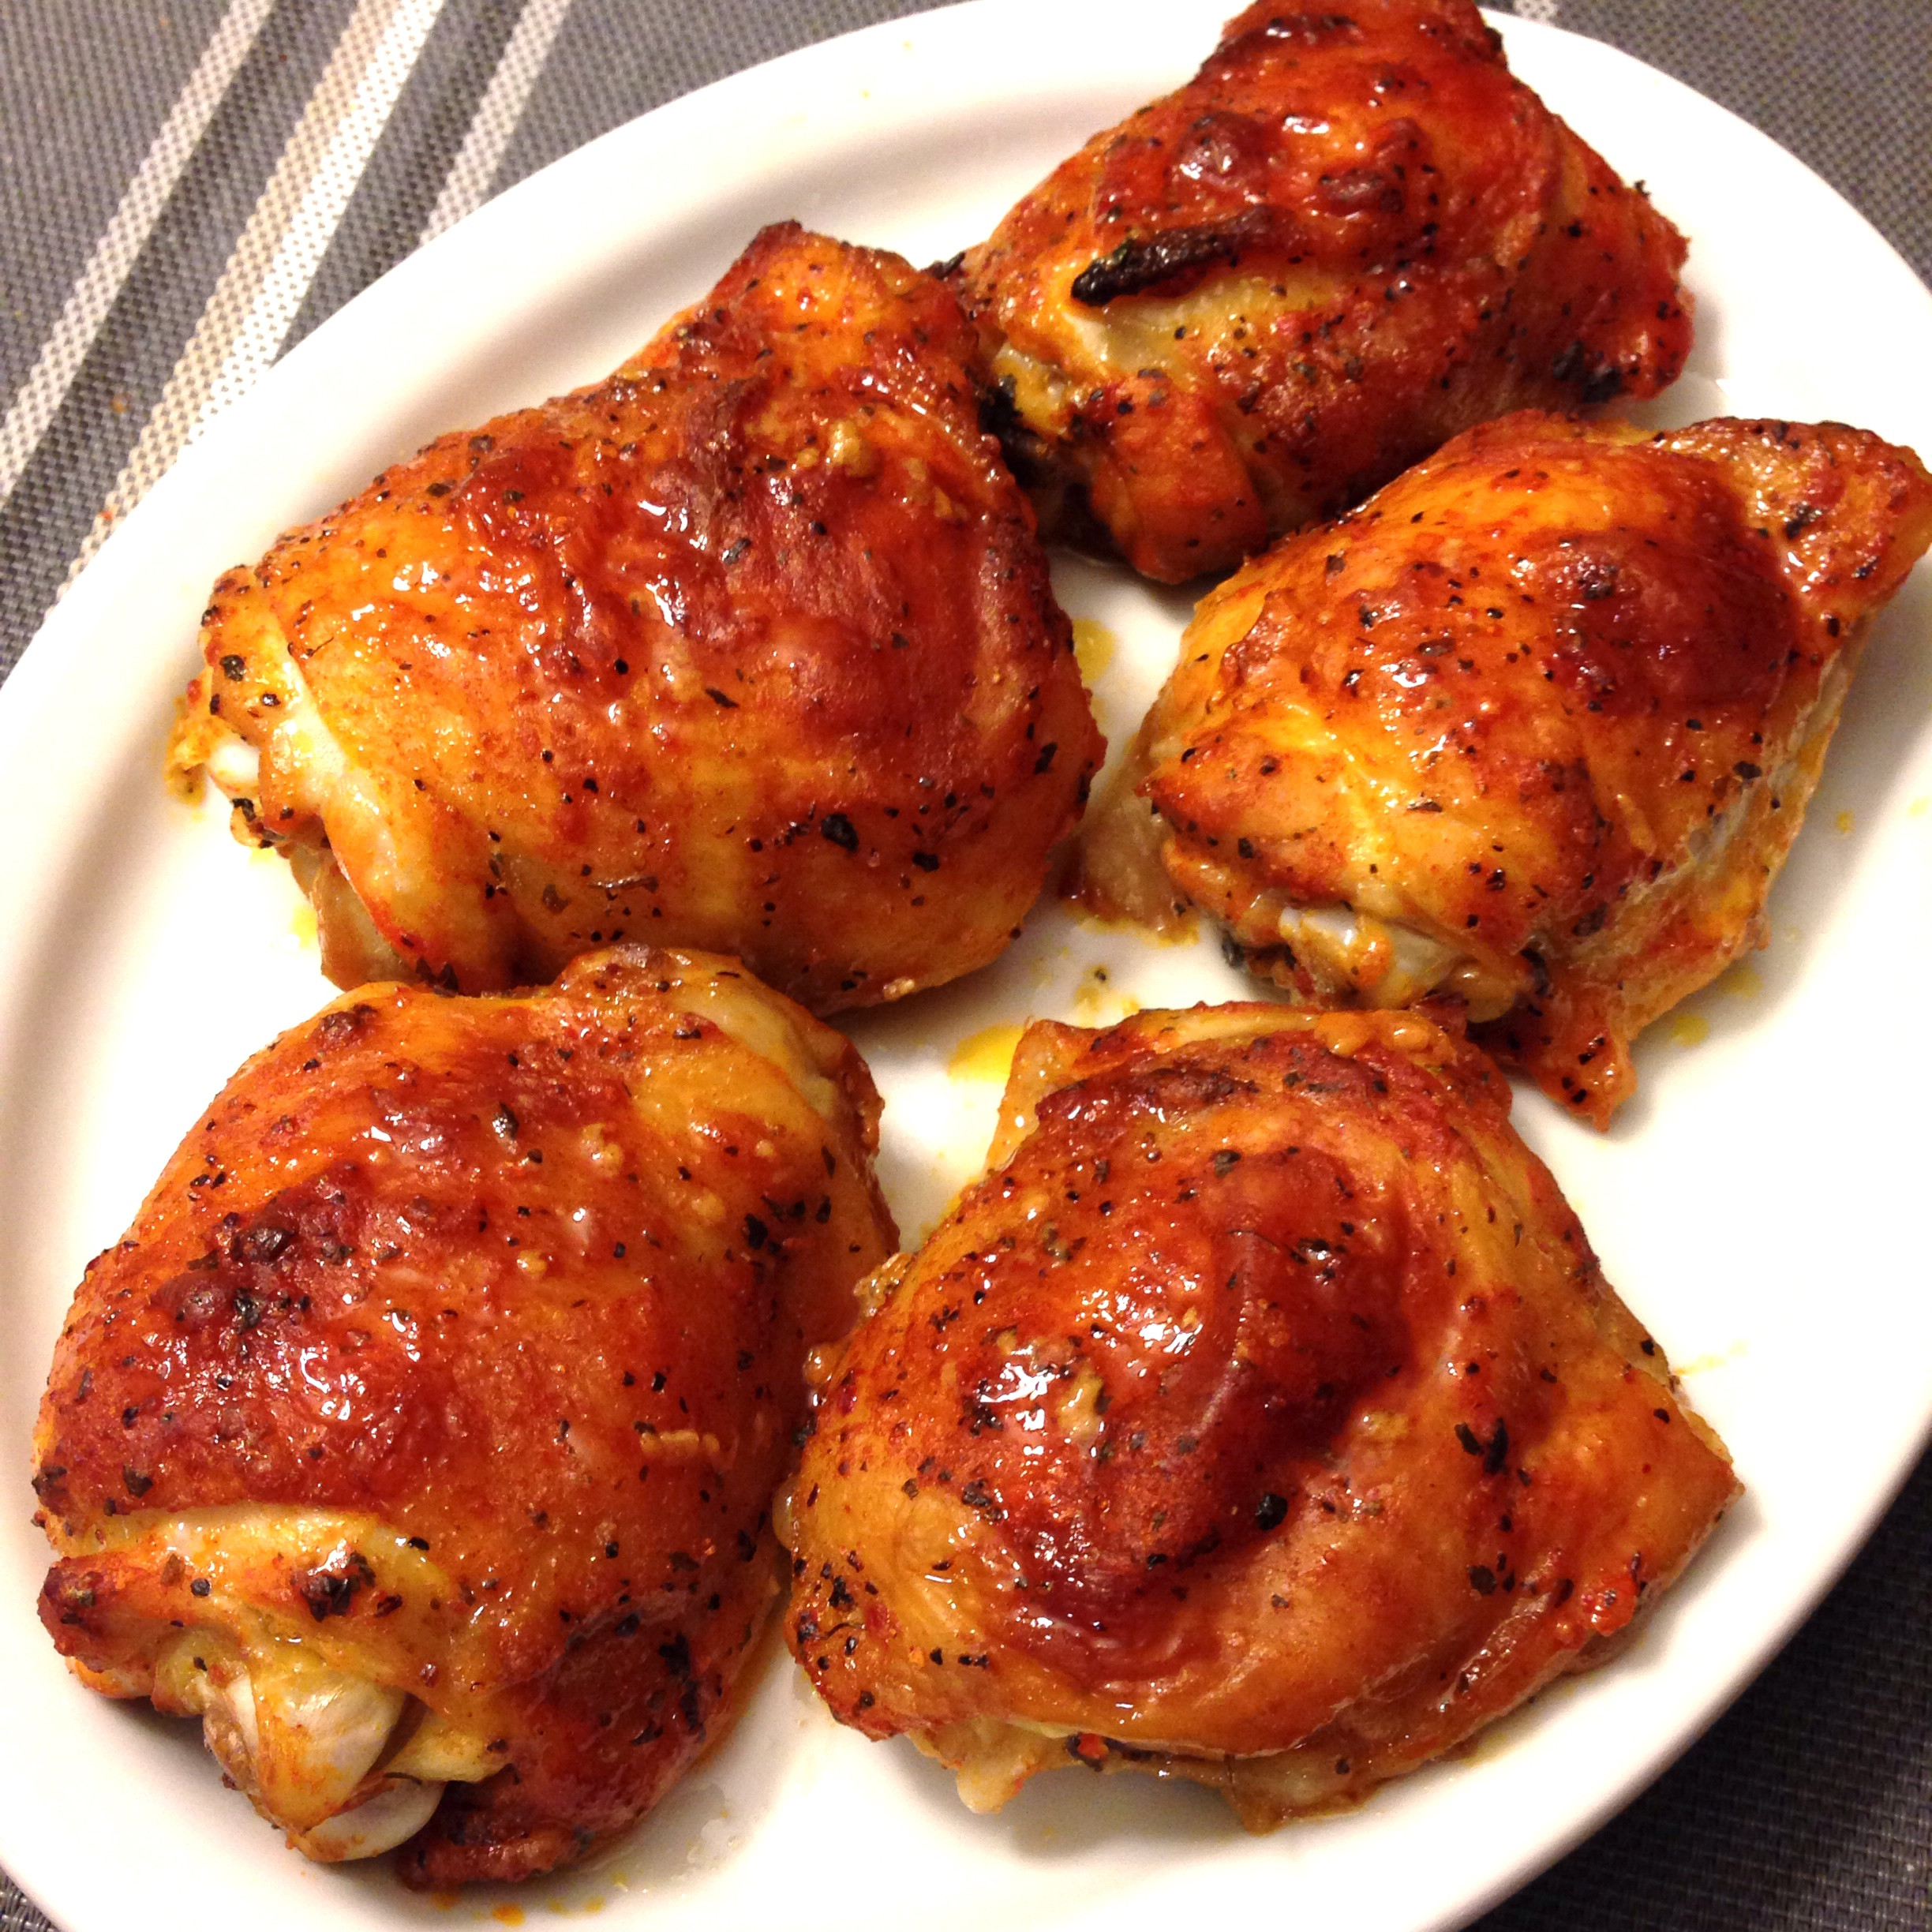 Baked Chicken Thighs Recipes Healthy top 20 Chili Lime Baked Chicken Thighs — My Healthy Dish